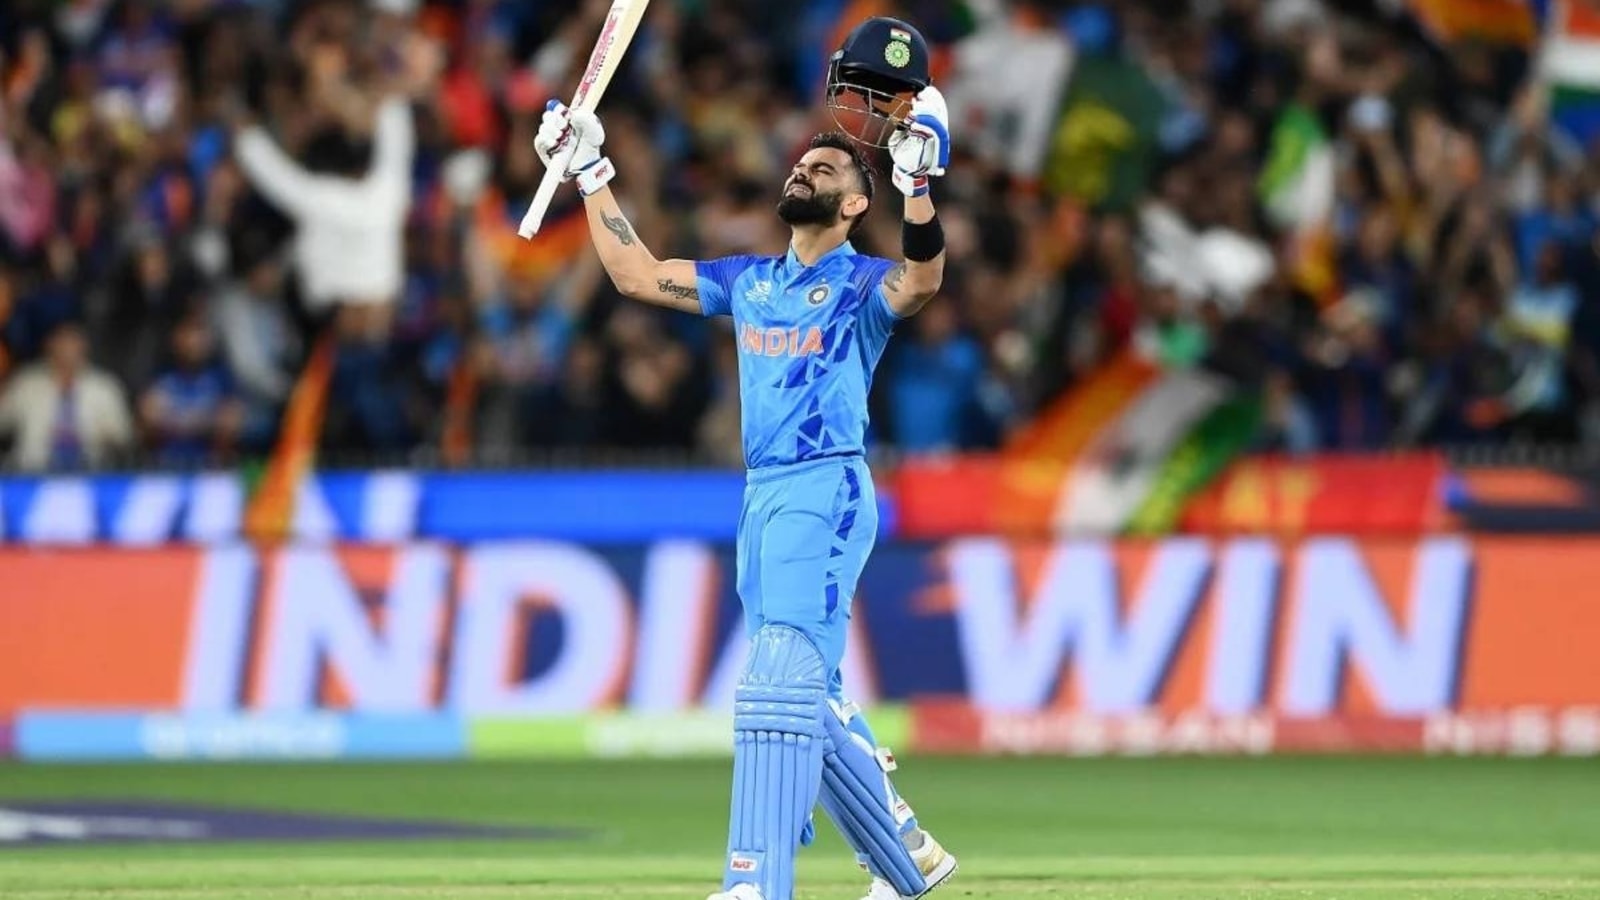 india-vs-pakistan-t20-world-cup-2022-highlights-epic-virat-kohli-innings-leads-ind-to-4-wicket-win-in-nail-biter